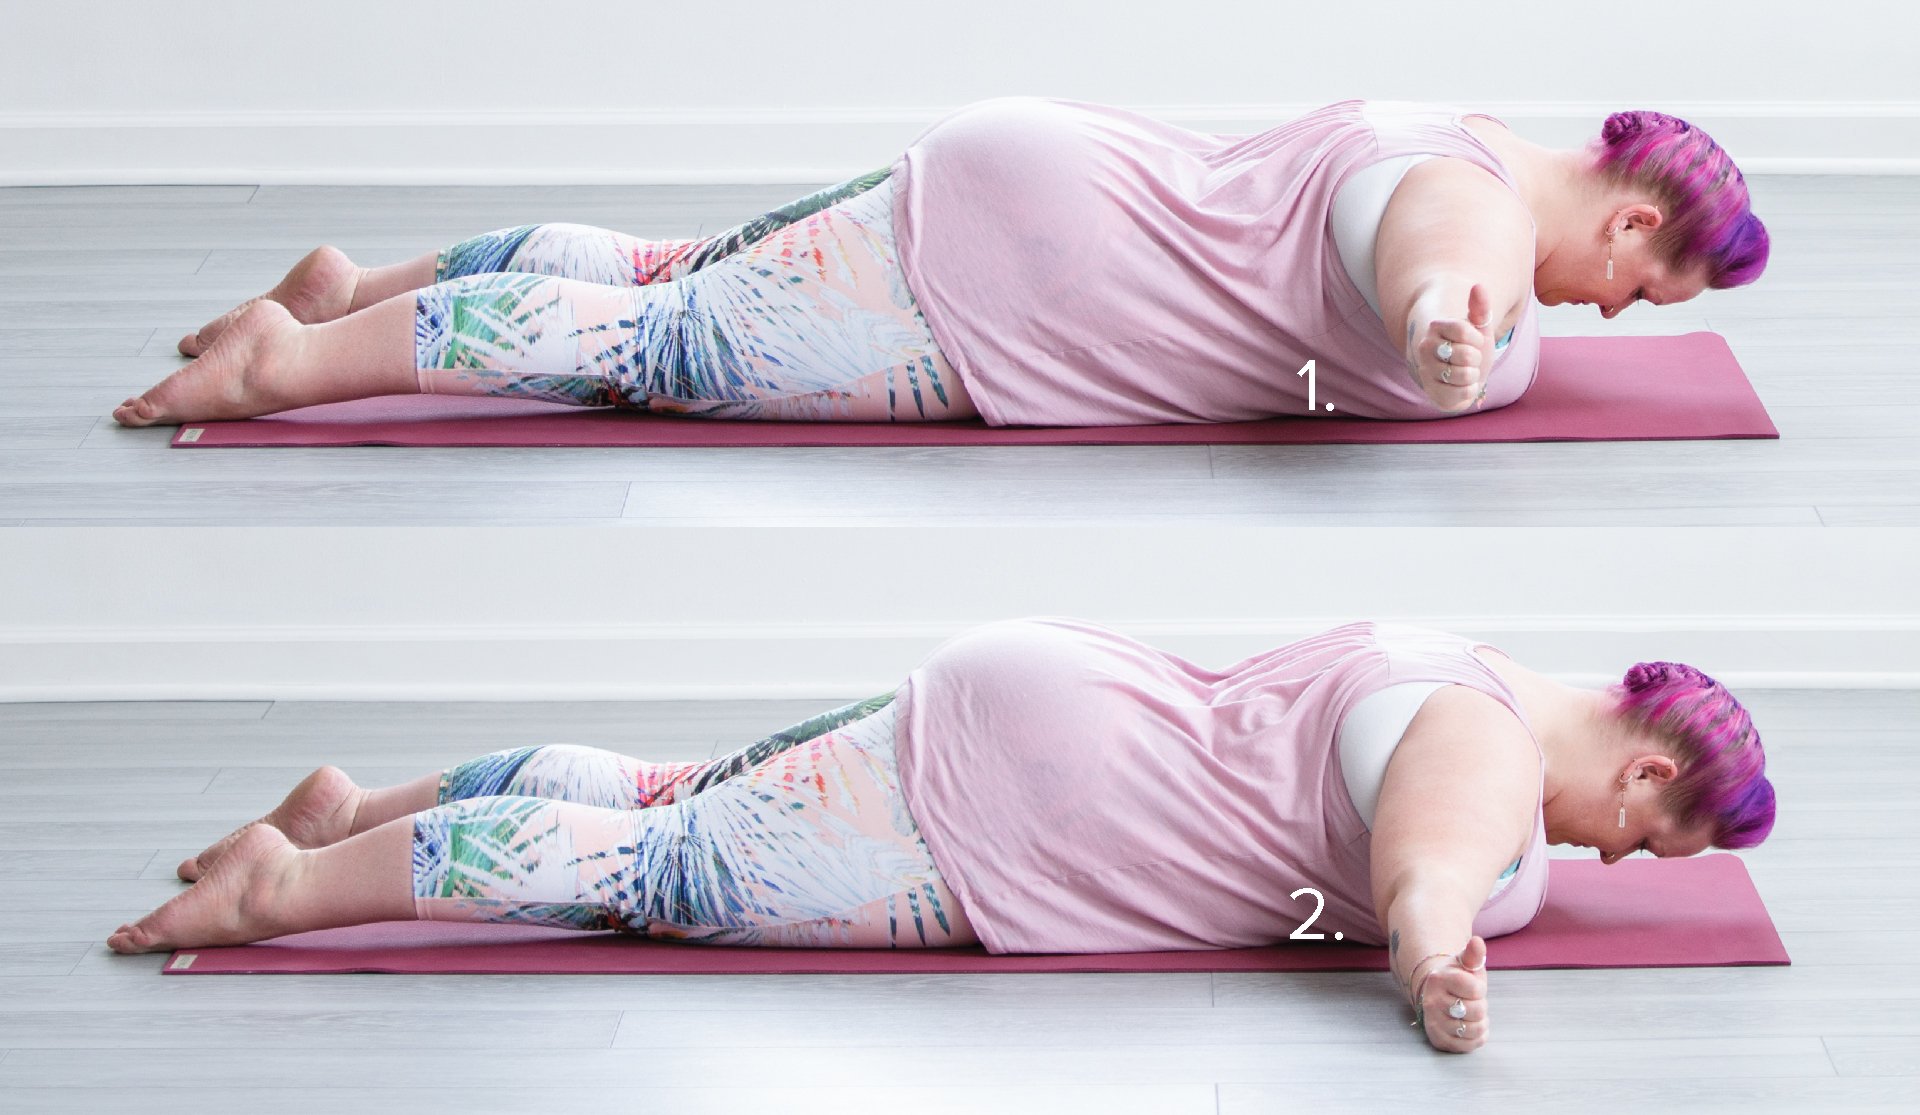 Yoga Anatomy: Different Types of Forward Head Posture and How to Work with  Them - YogaUOnline